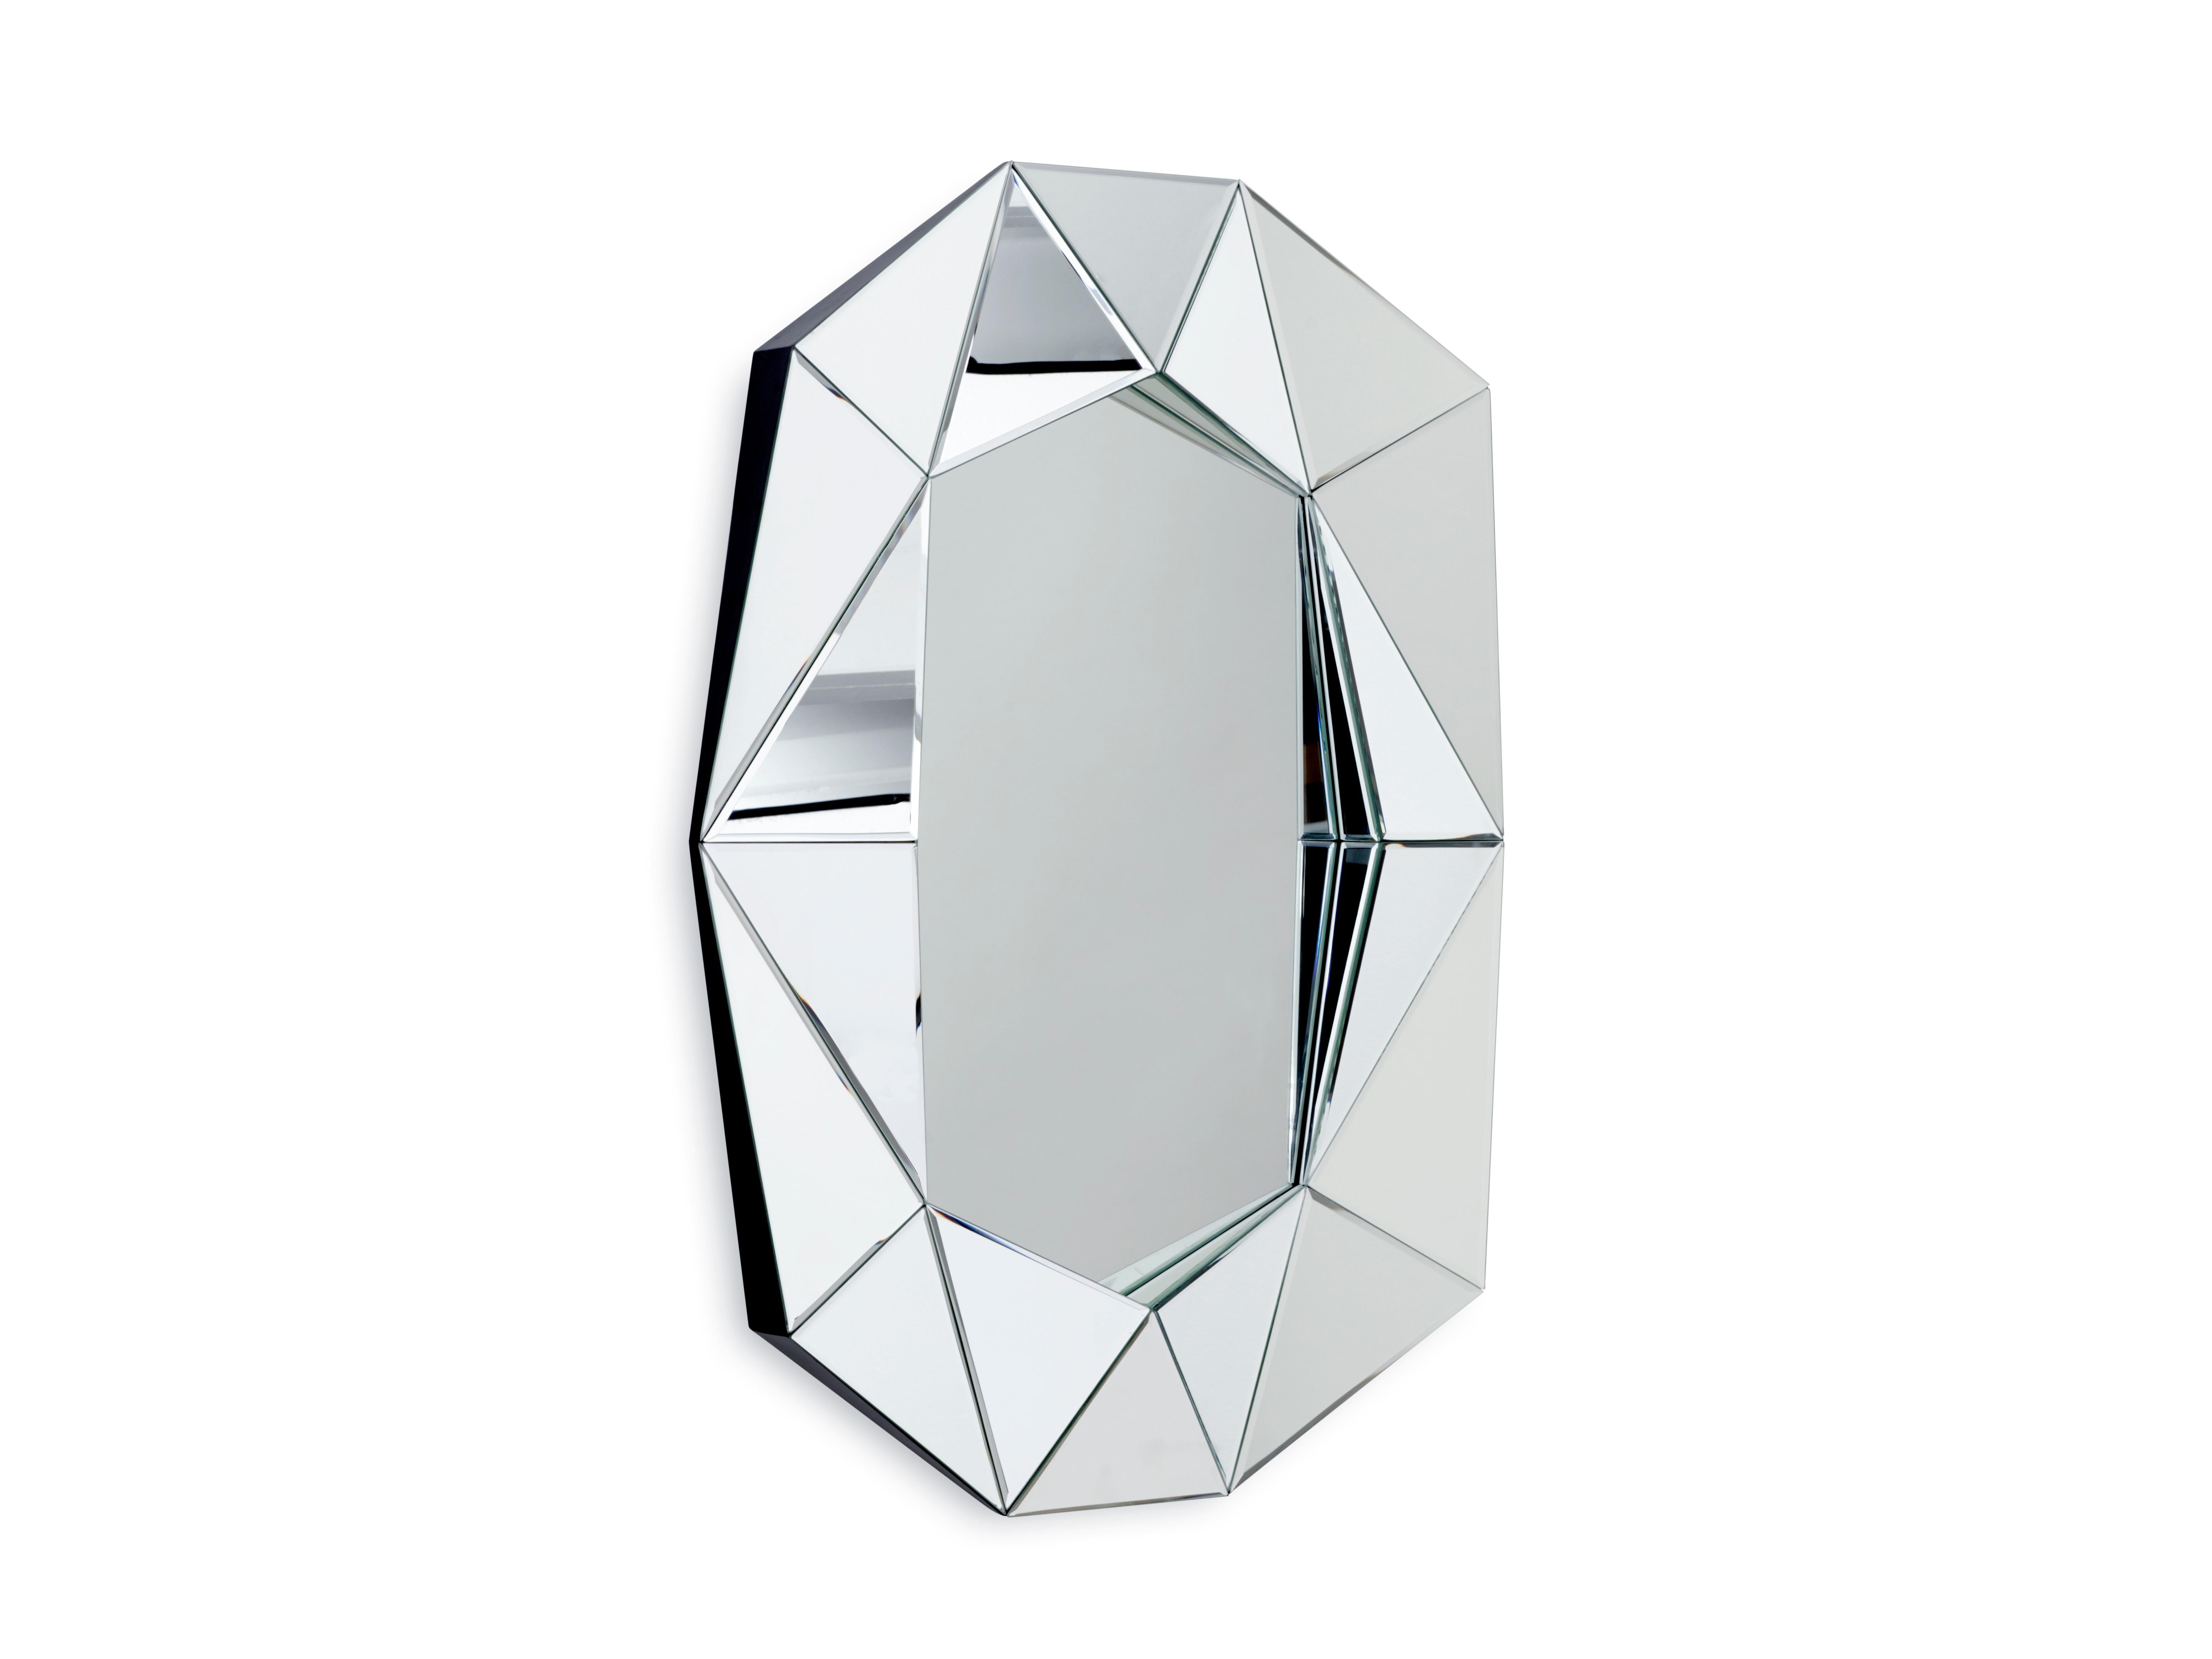 The Diamond large mirror illustrates a perfect combination of function and art. This unique mirror is inspired by the dazzling Art Deco era with its striking diamond shaped wedges, and yet it still manages to invoke a classic feel when placed in the